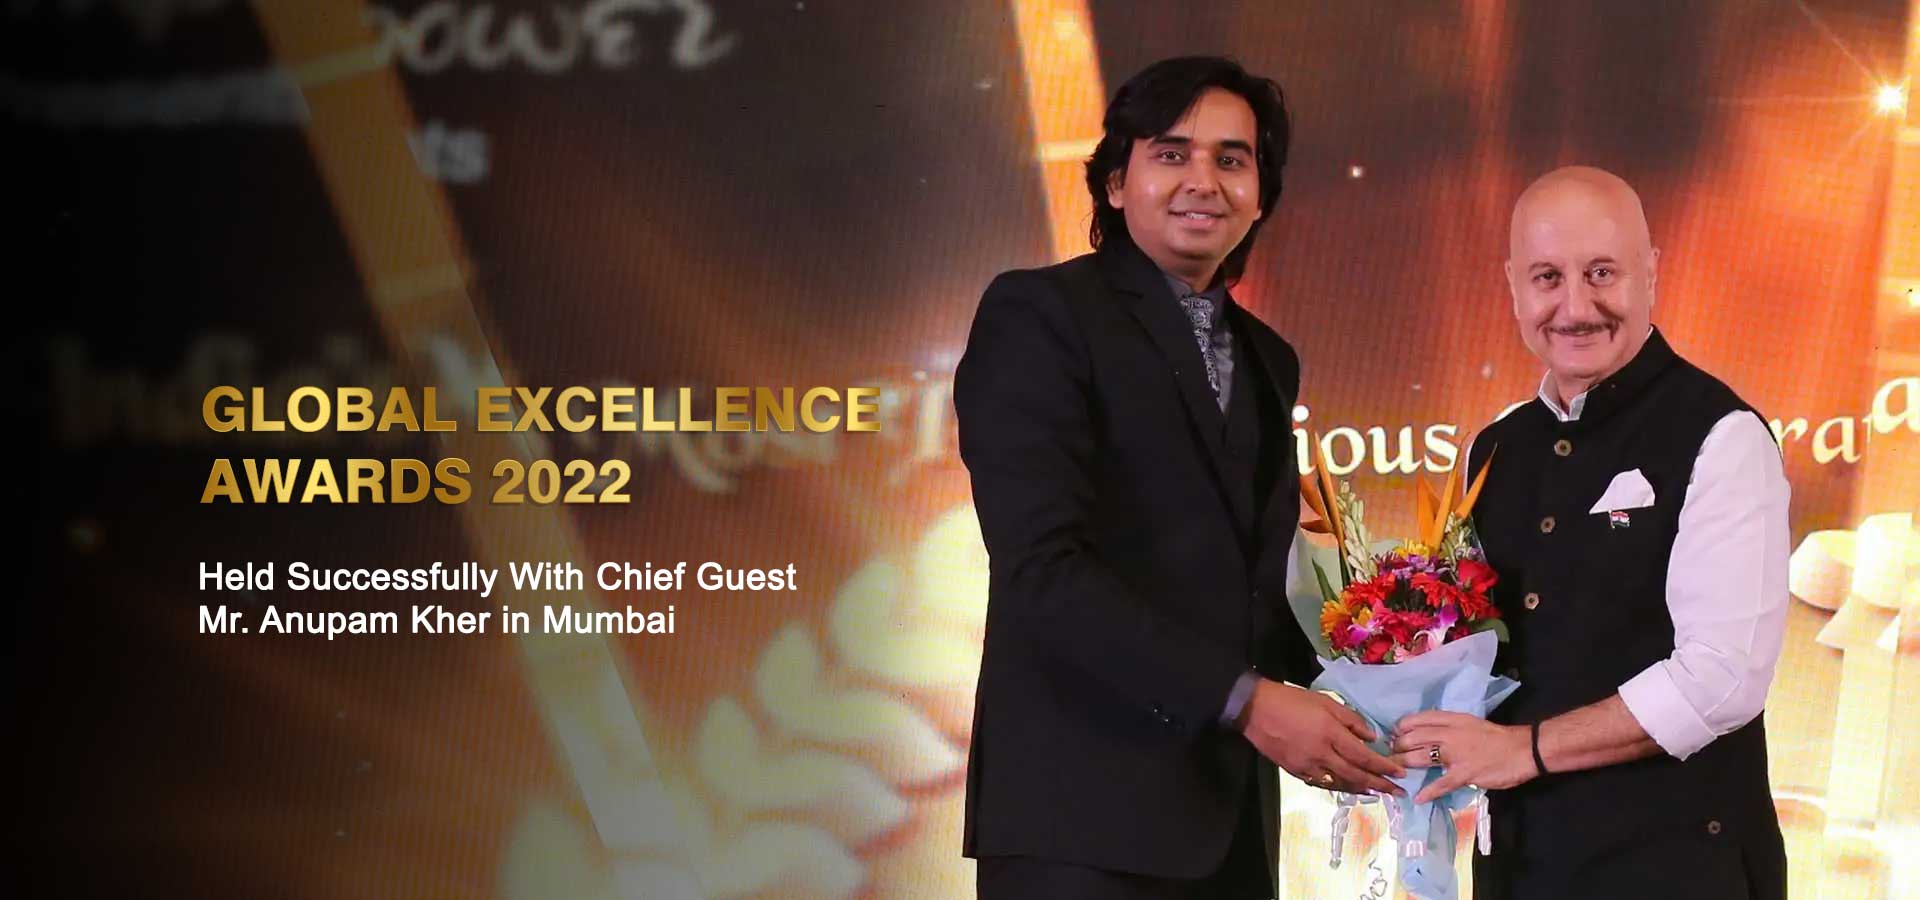 Global Excellence Awards 2022 Completed Successfully